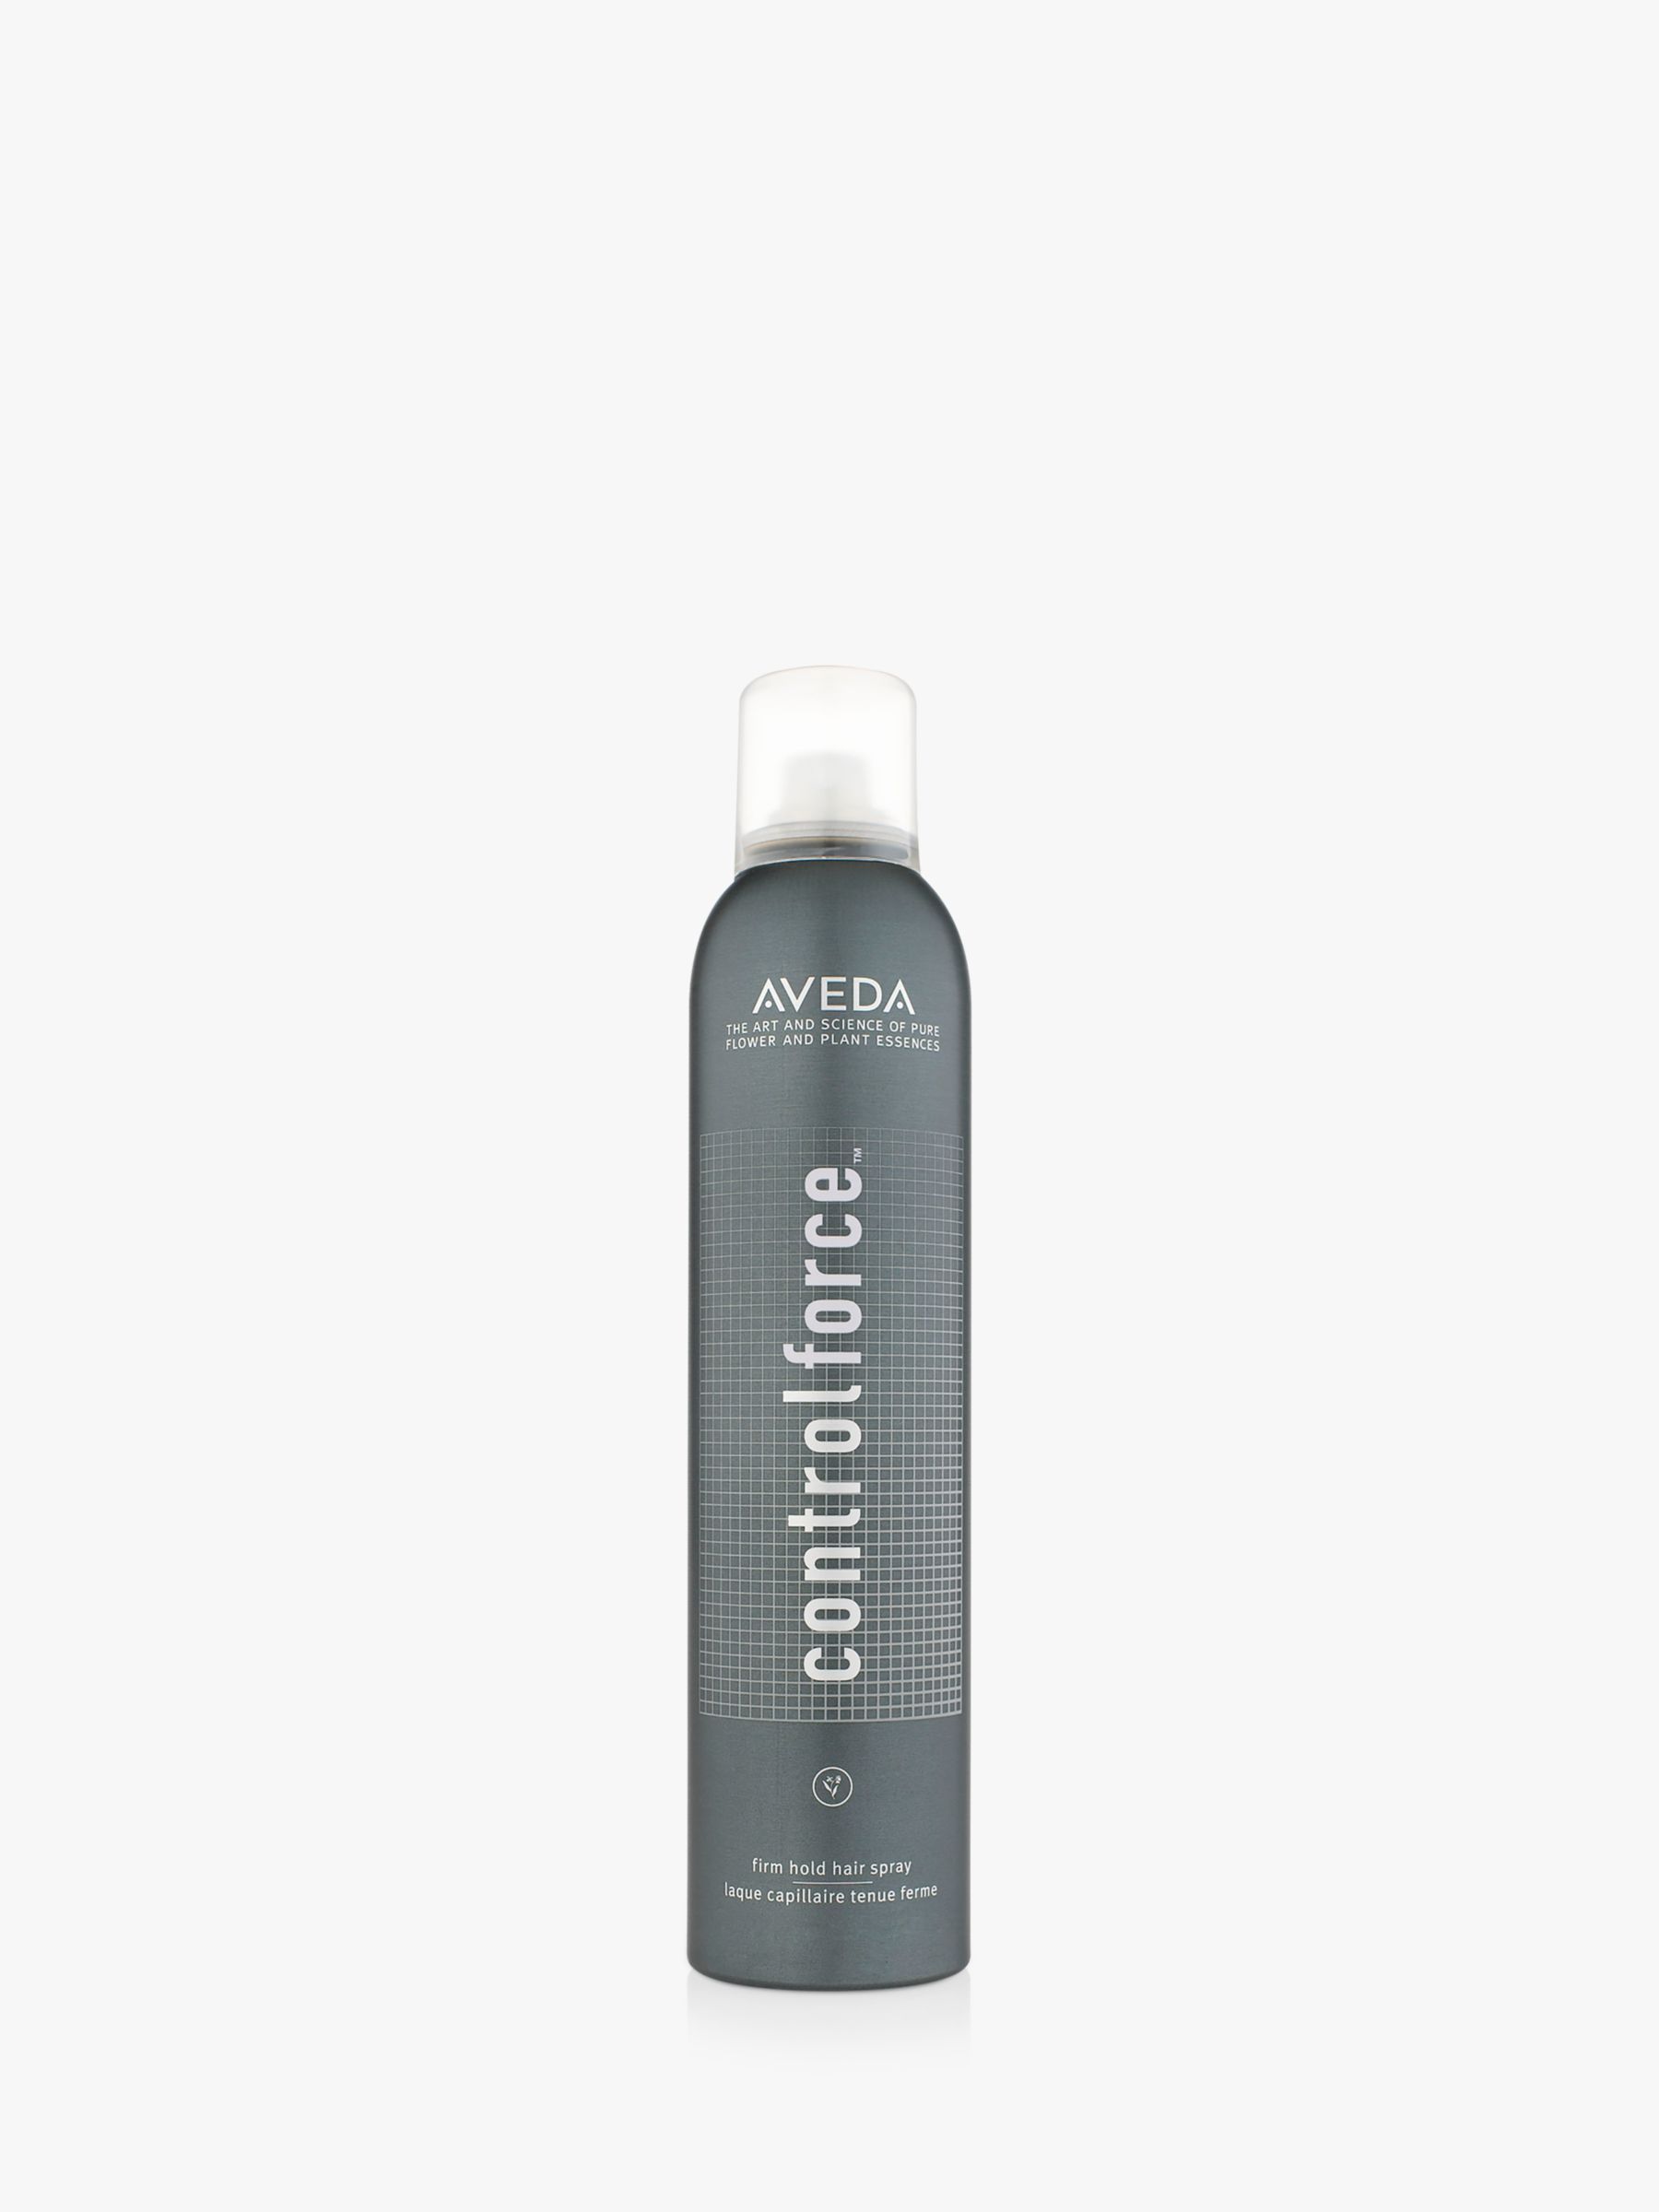 Aveda Control Force™ Firm Hold Hair Spray, 300ml